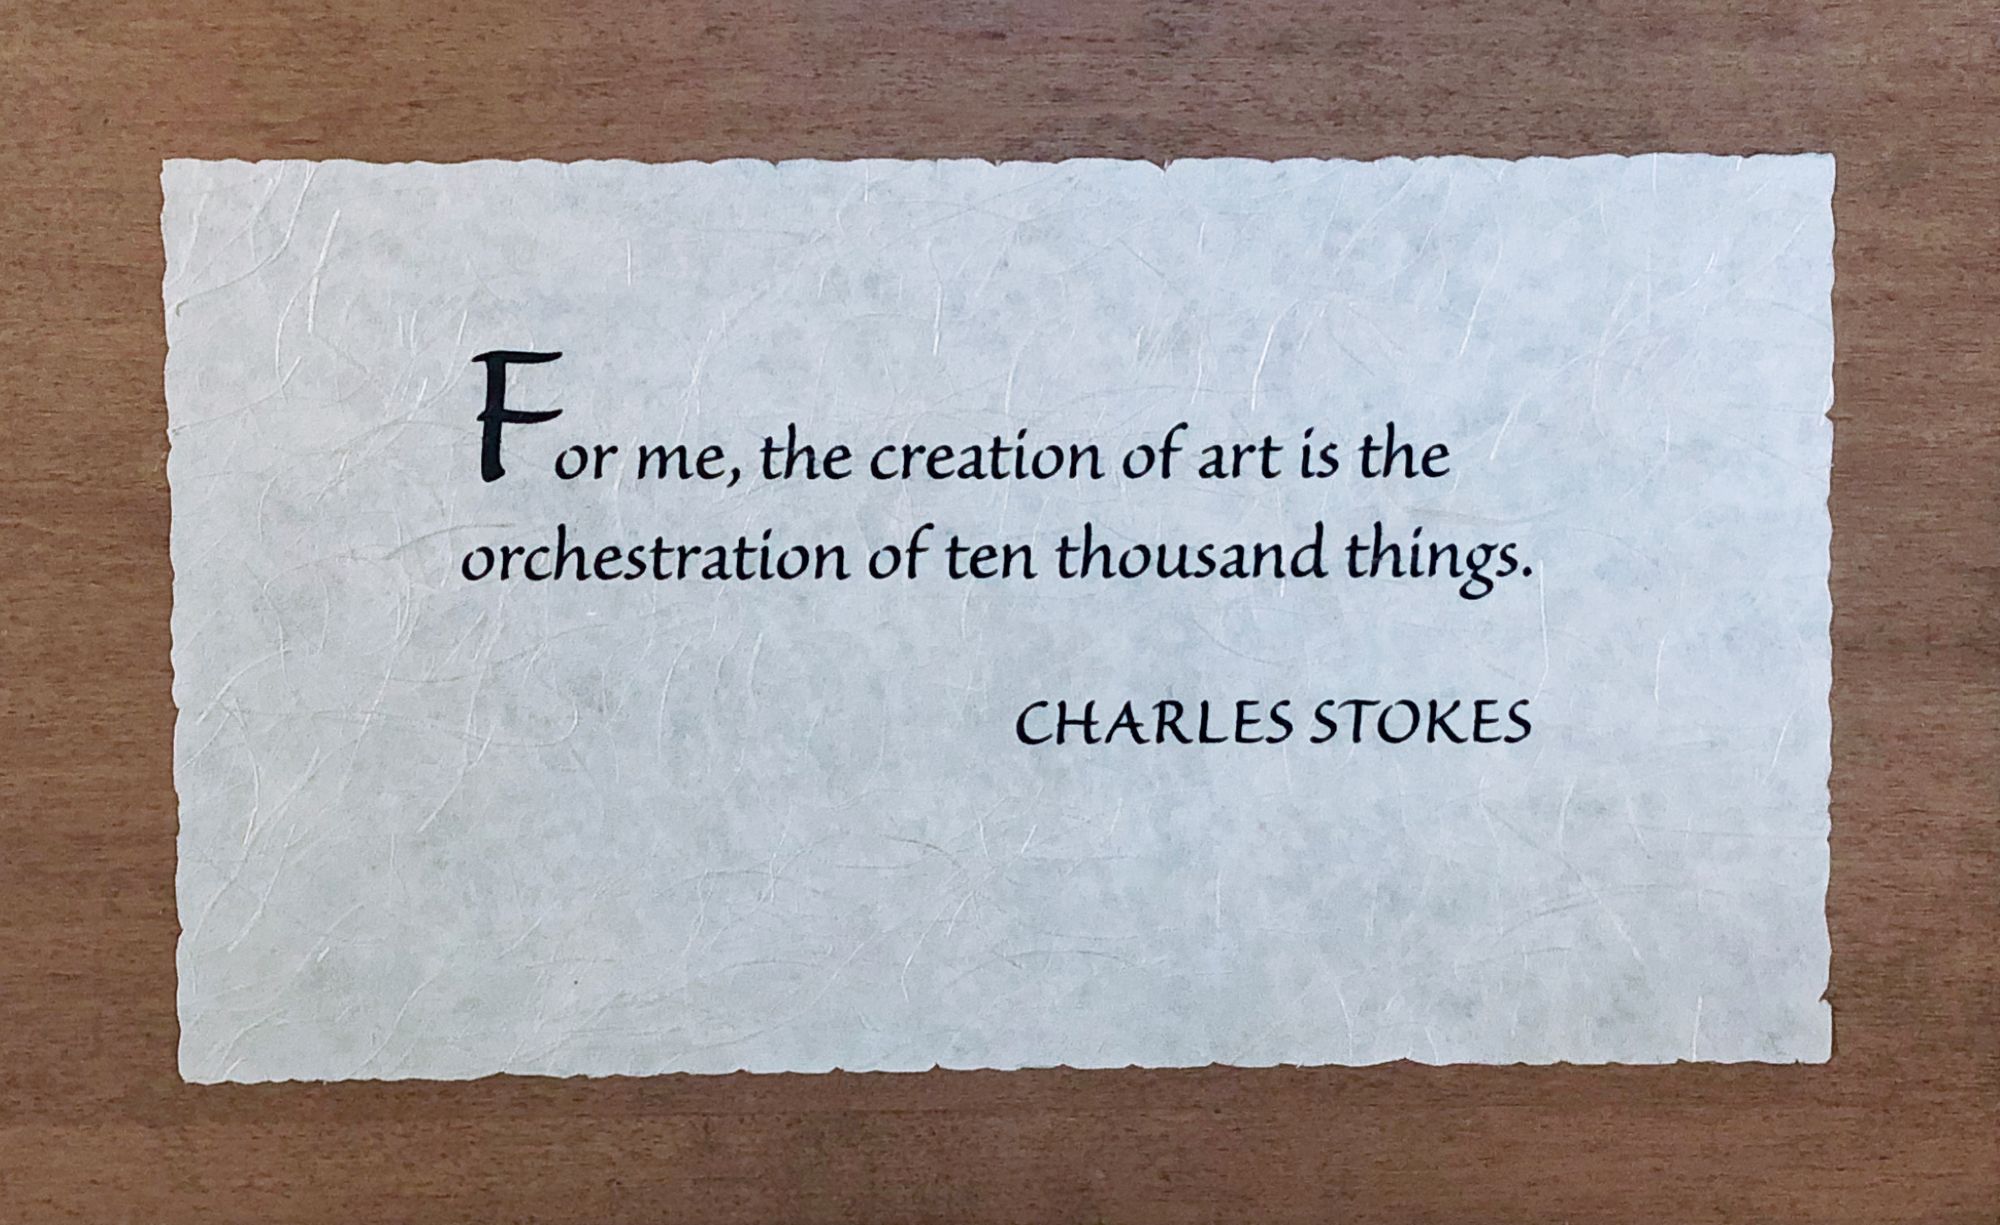 Photo of wooden plaque with Charles Stokes quote: “For me, the creation of art is the orchestration of ten thousand things.” 